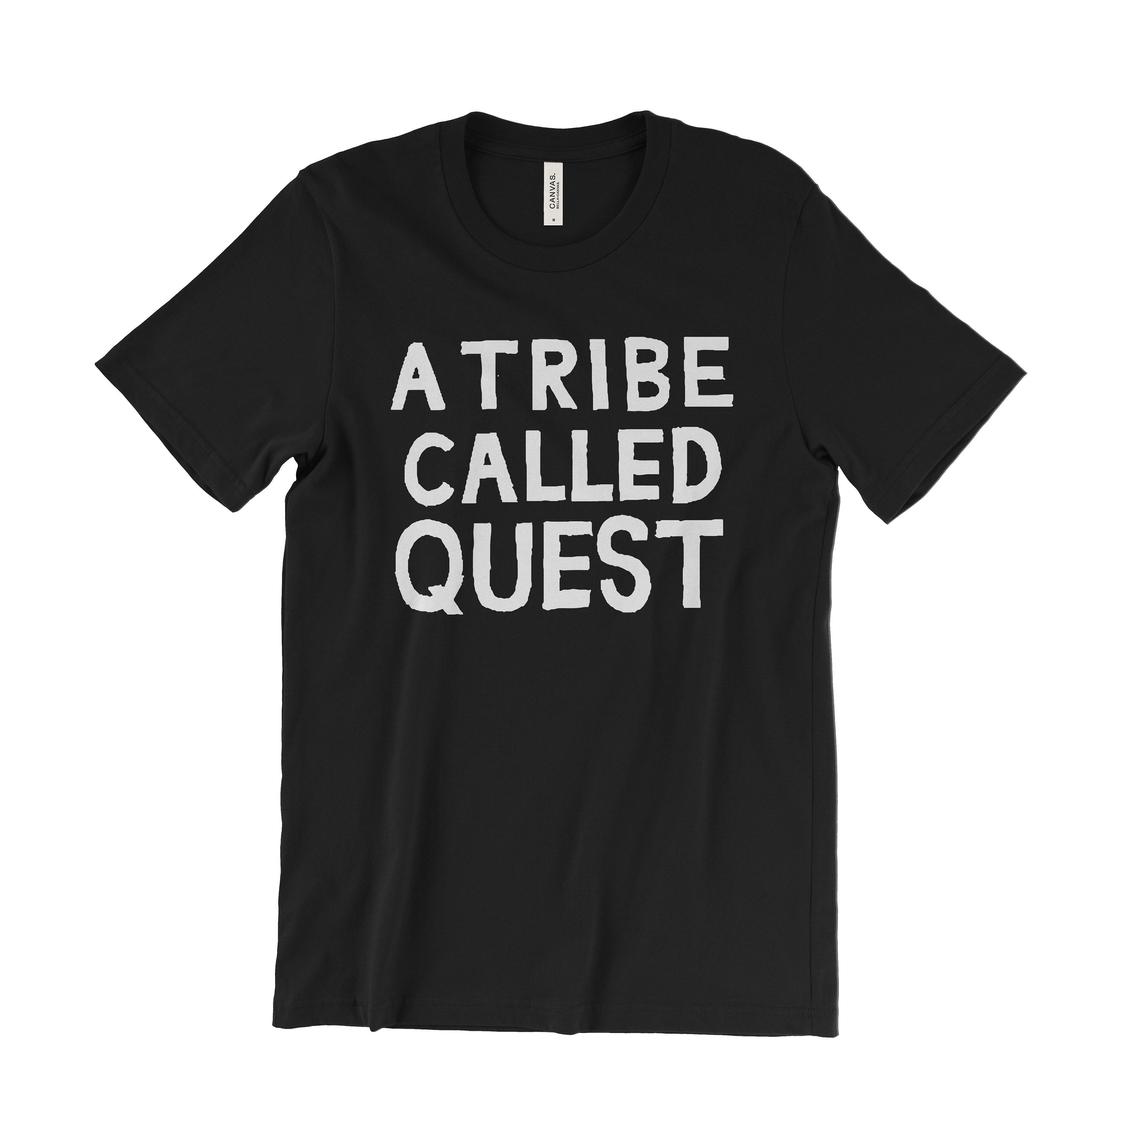 A Tribe Called Quest Text T-Shirt